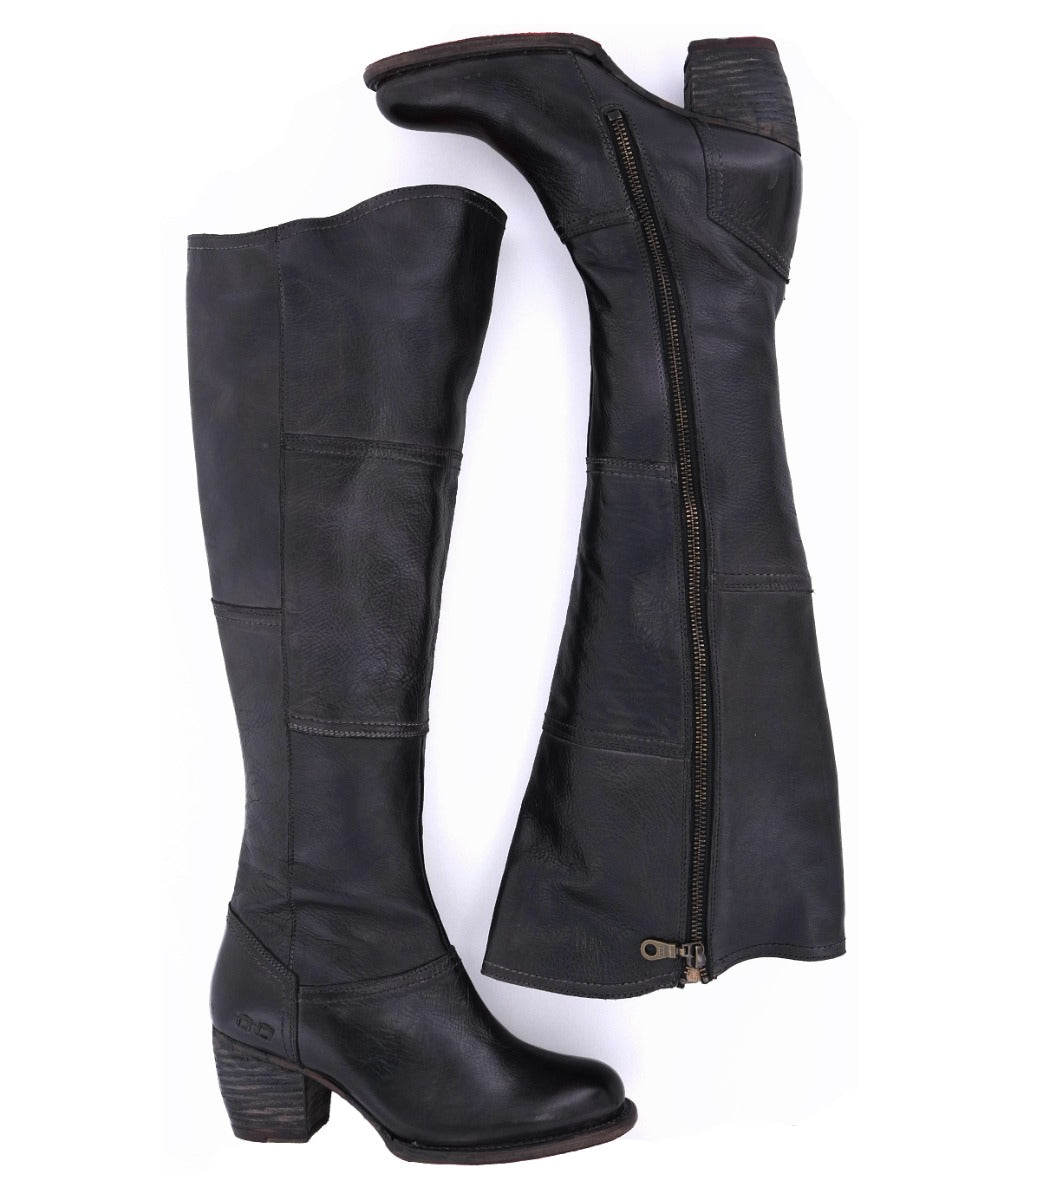 A pair of Bed Stu Kennice black leather boots with zippers on the side.